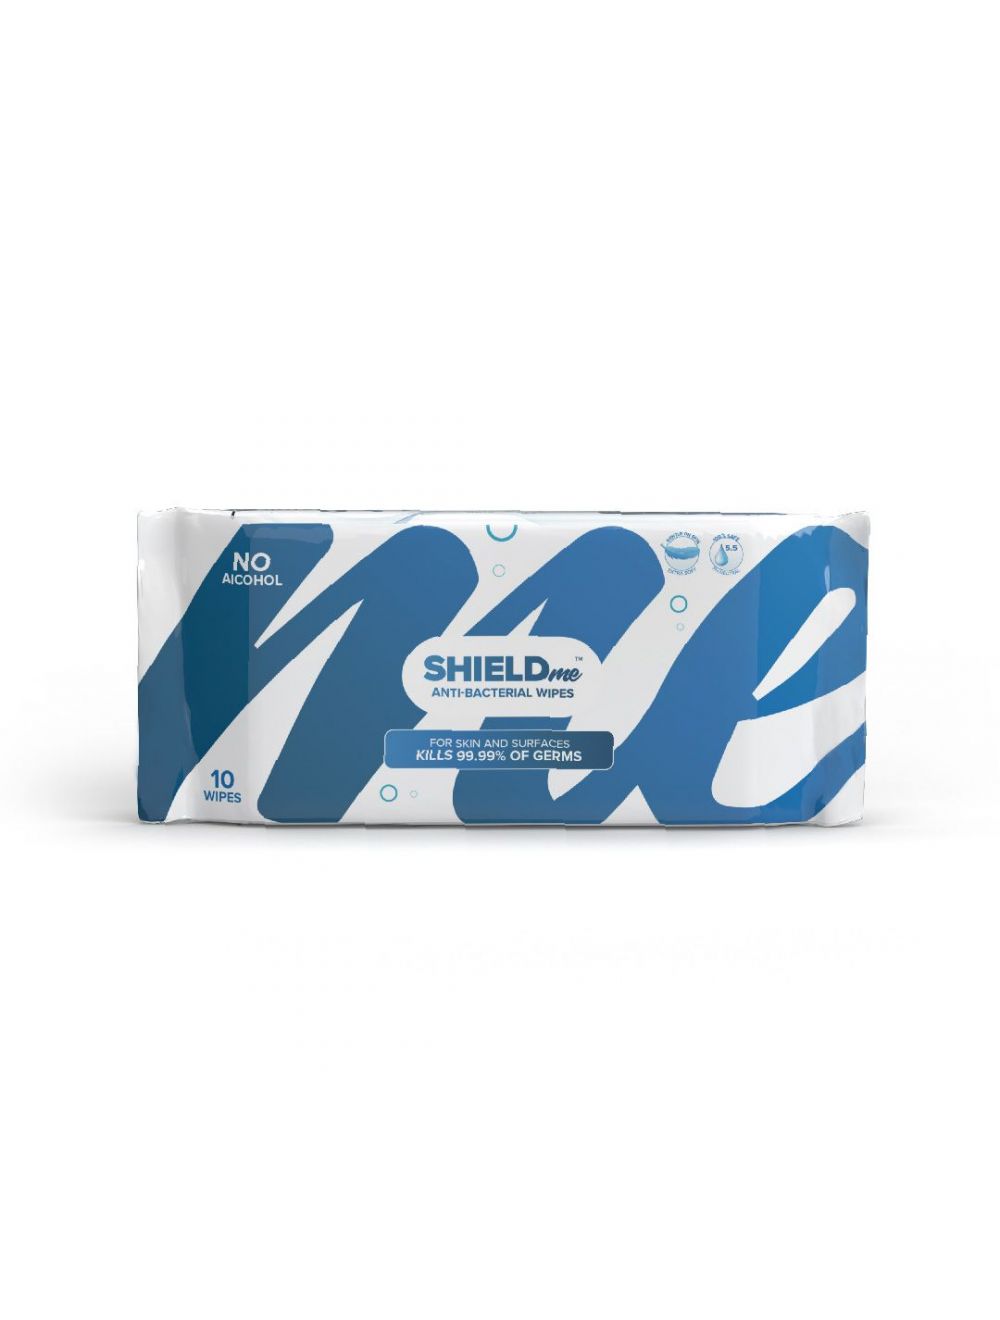 SHIELDme Disinfecting Wipes, 100% Natural - 10 Wipes - Pack-ZK-UQYE-OW6J